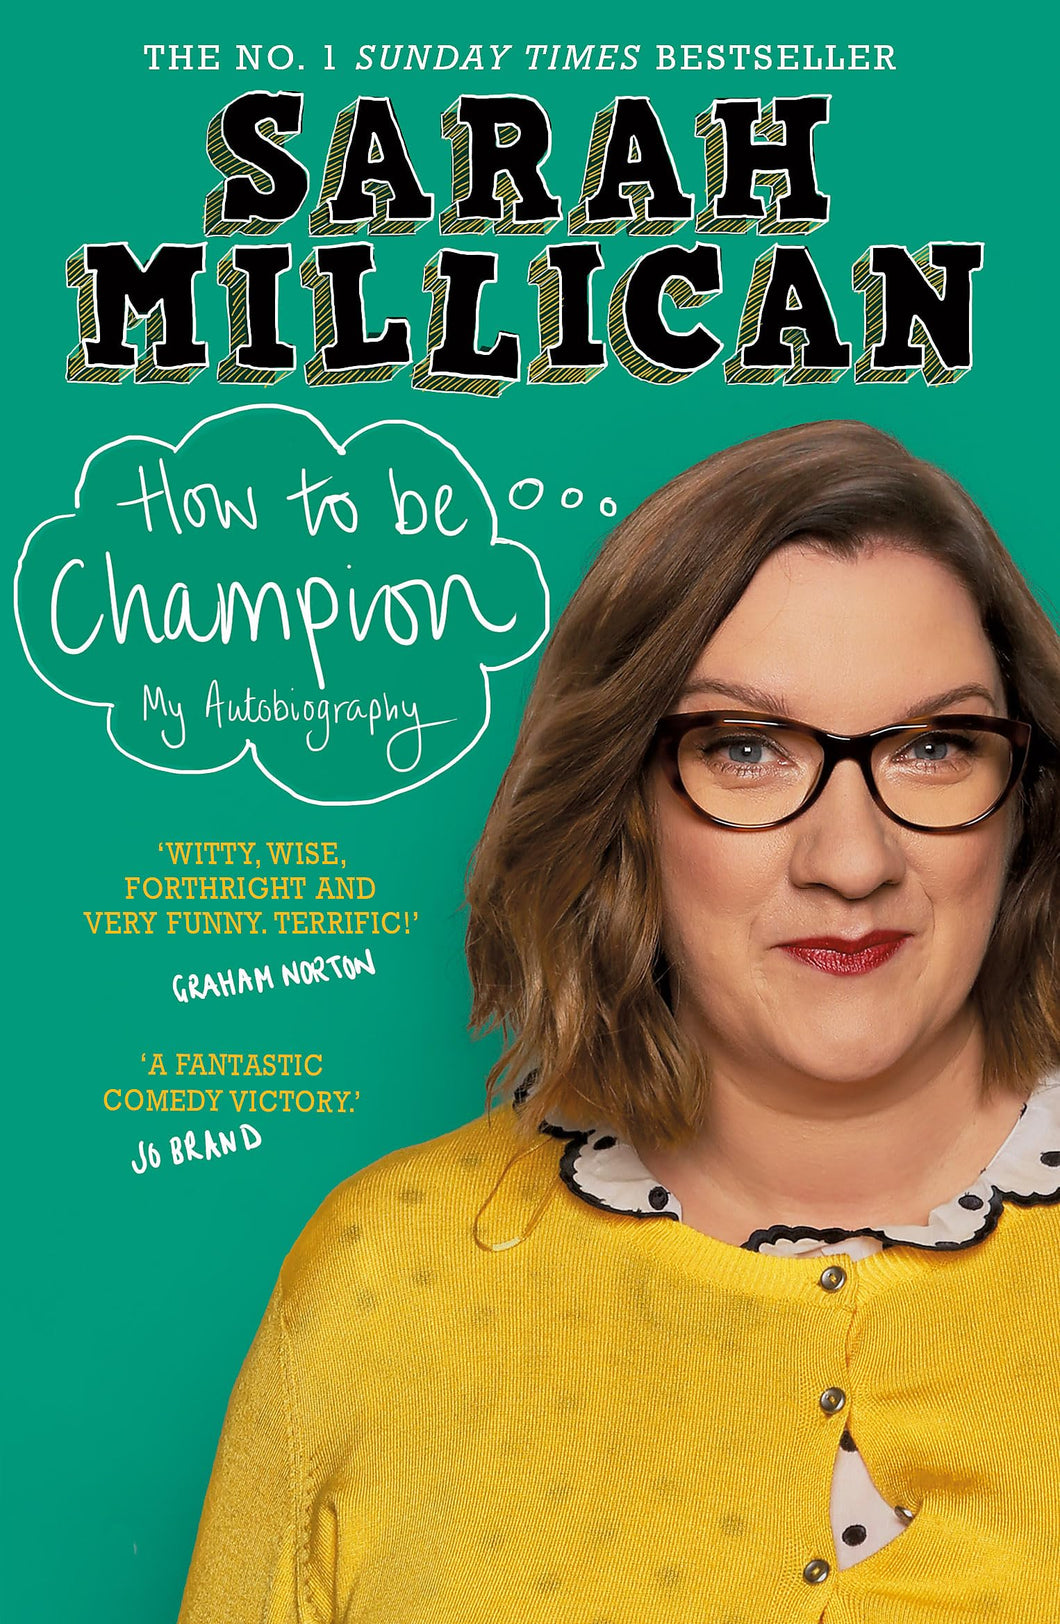 How to be Champion, Sarah Millican